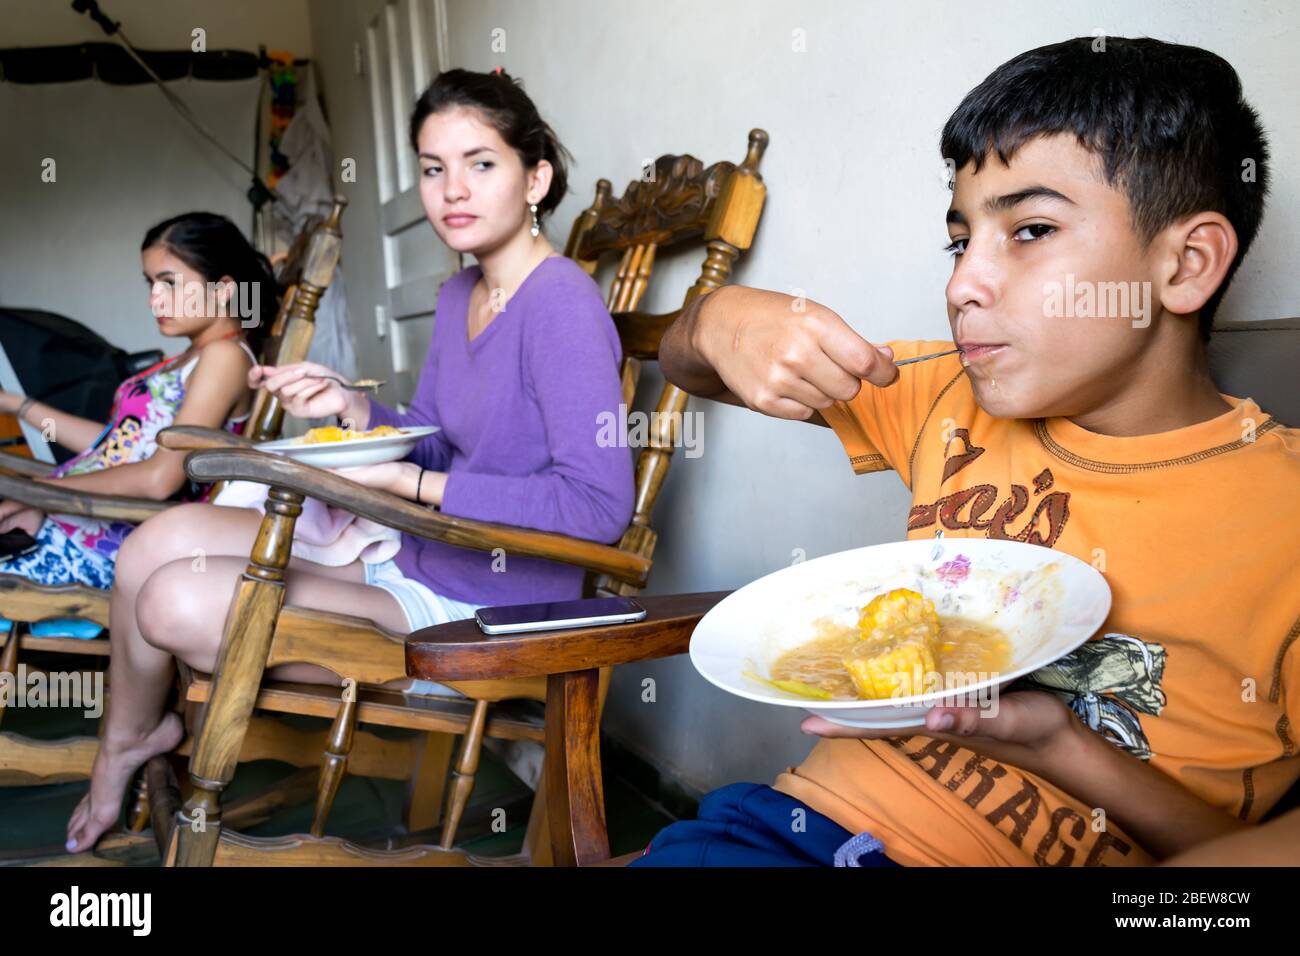 Actual scene of a latin family sharing lunch, they are having a traditional meal made out of corn. Stock Photo